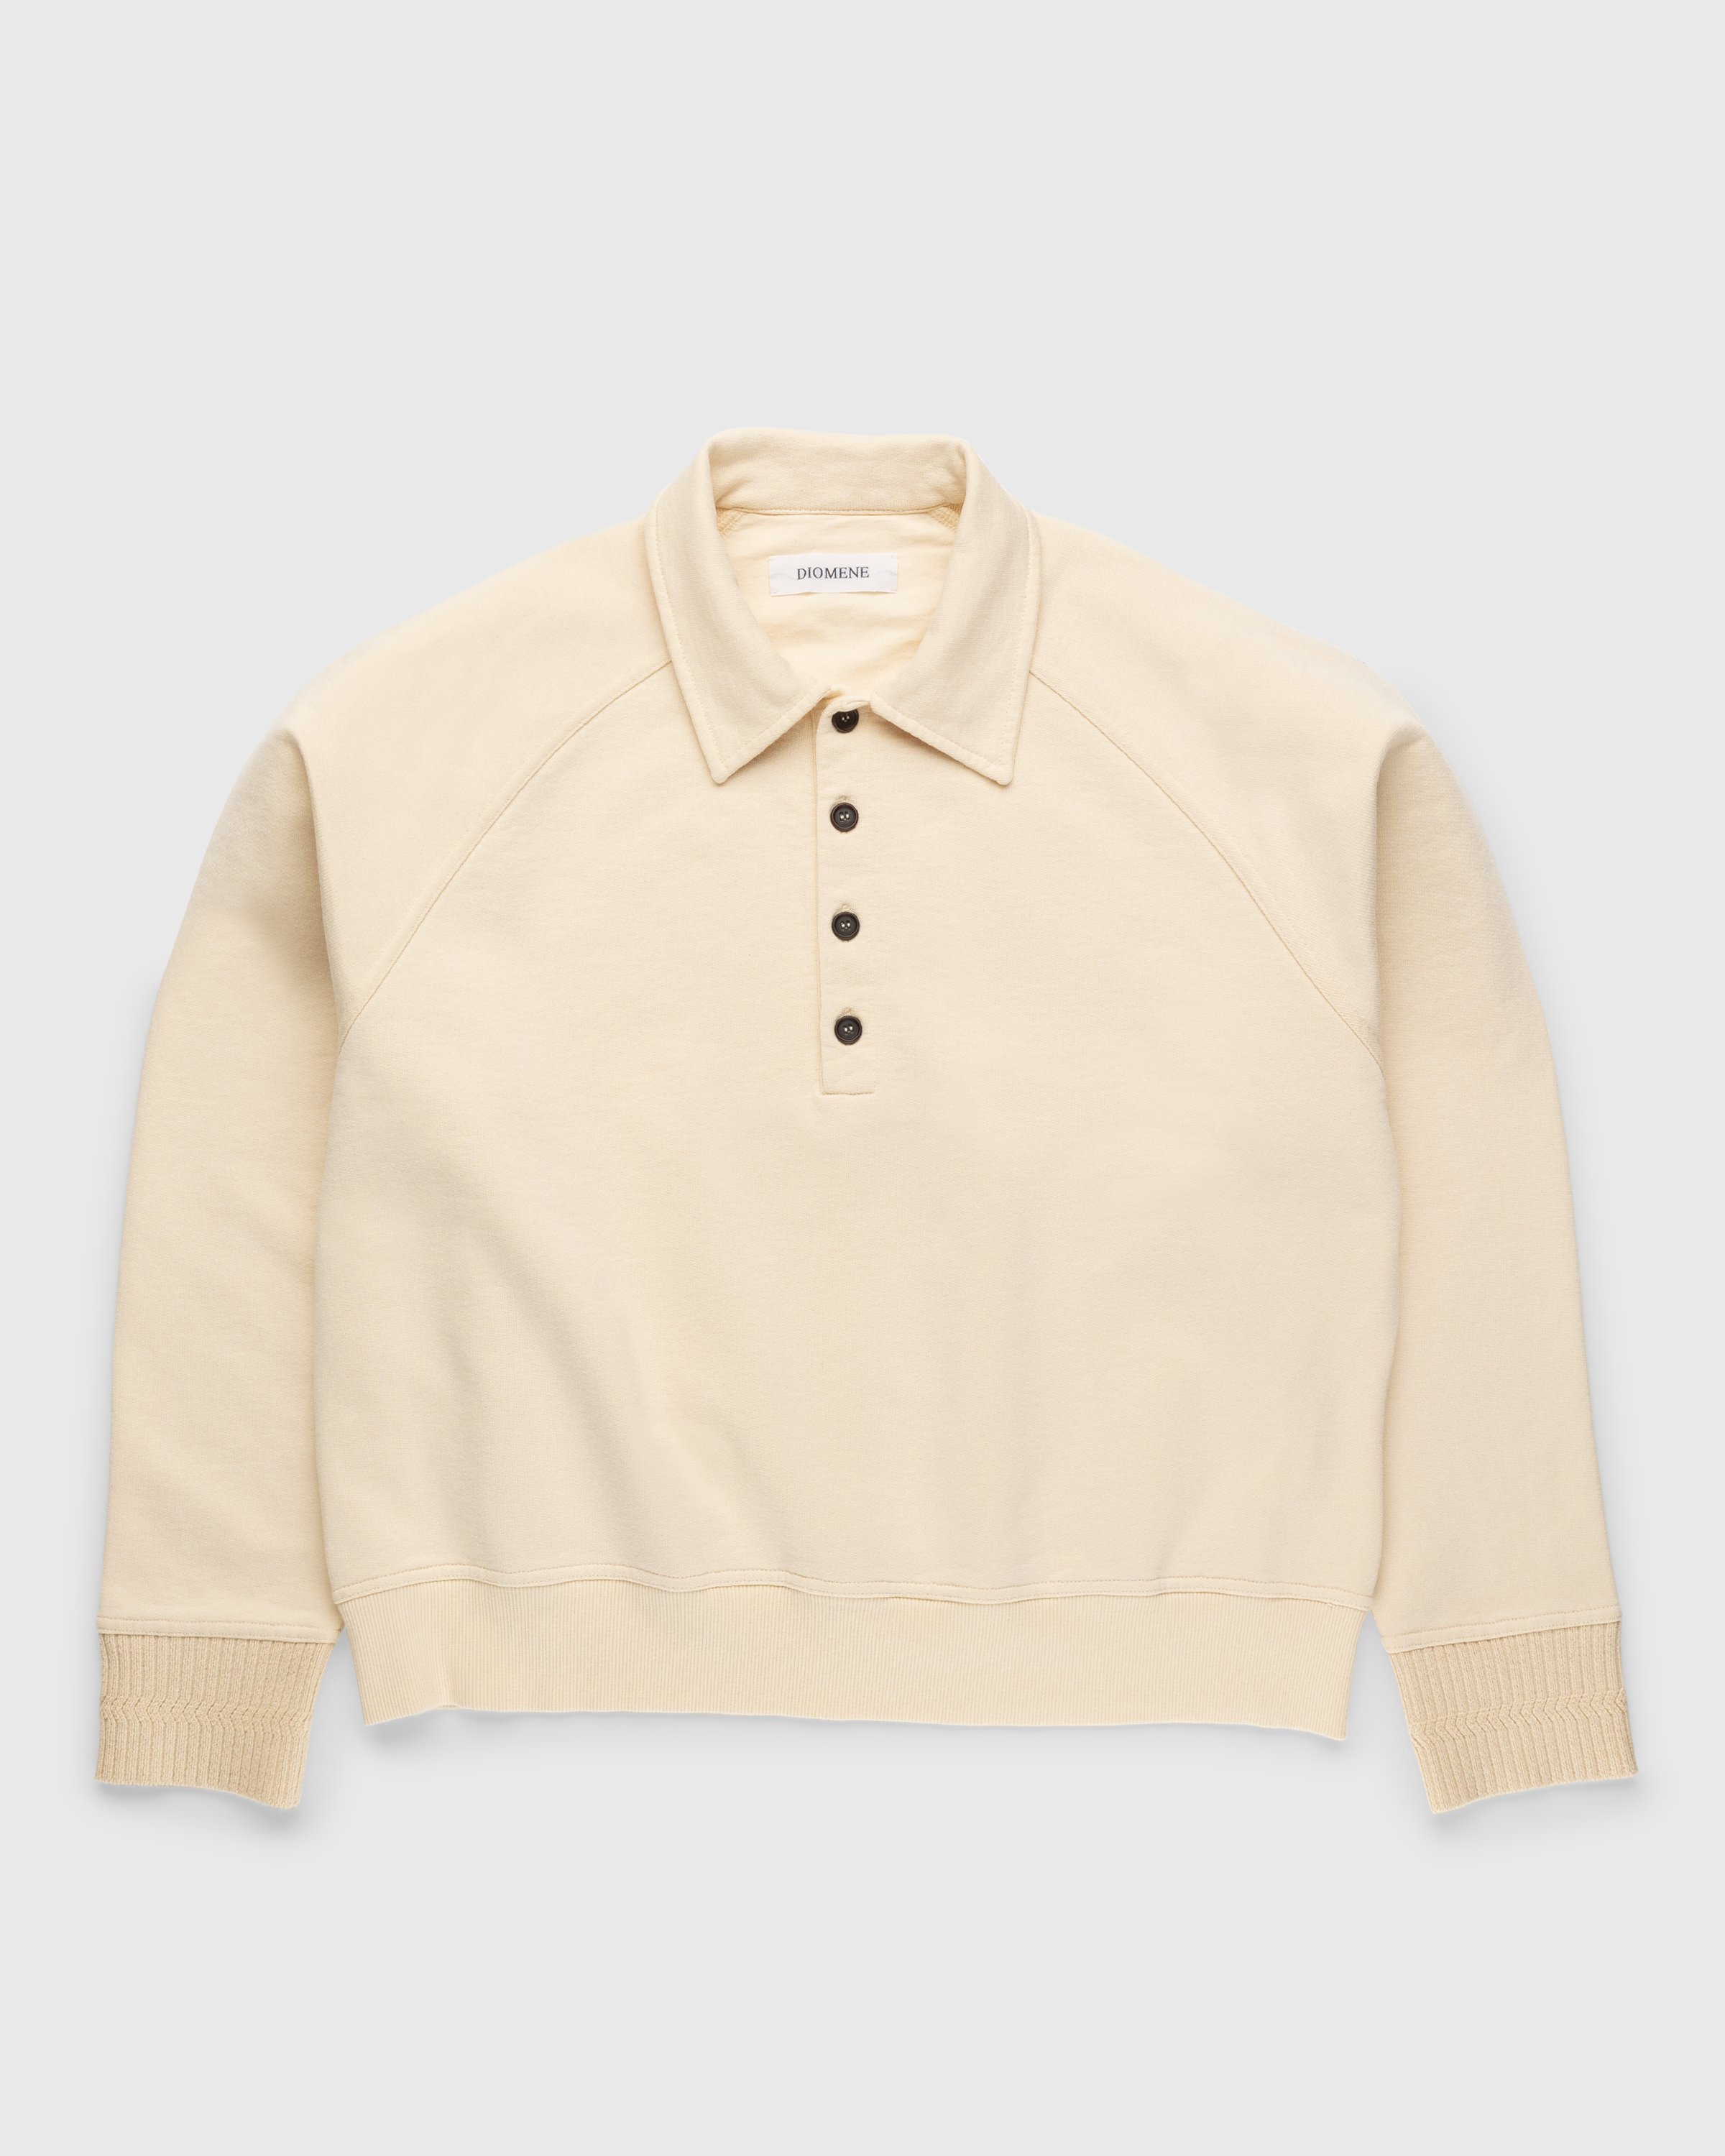 Diomene by Damir Doma - Heavy Jersey Polo Cloud Cream - Clothing - Beige - Image 1